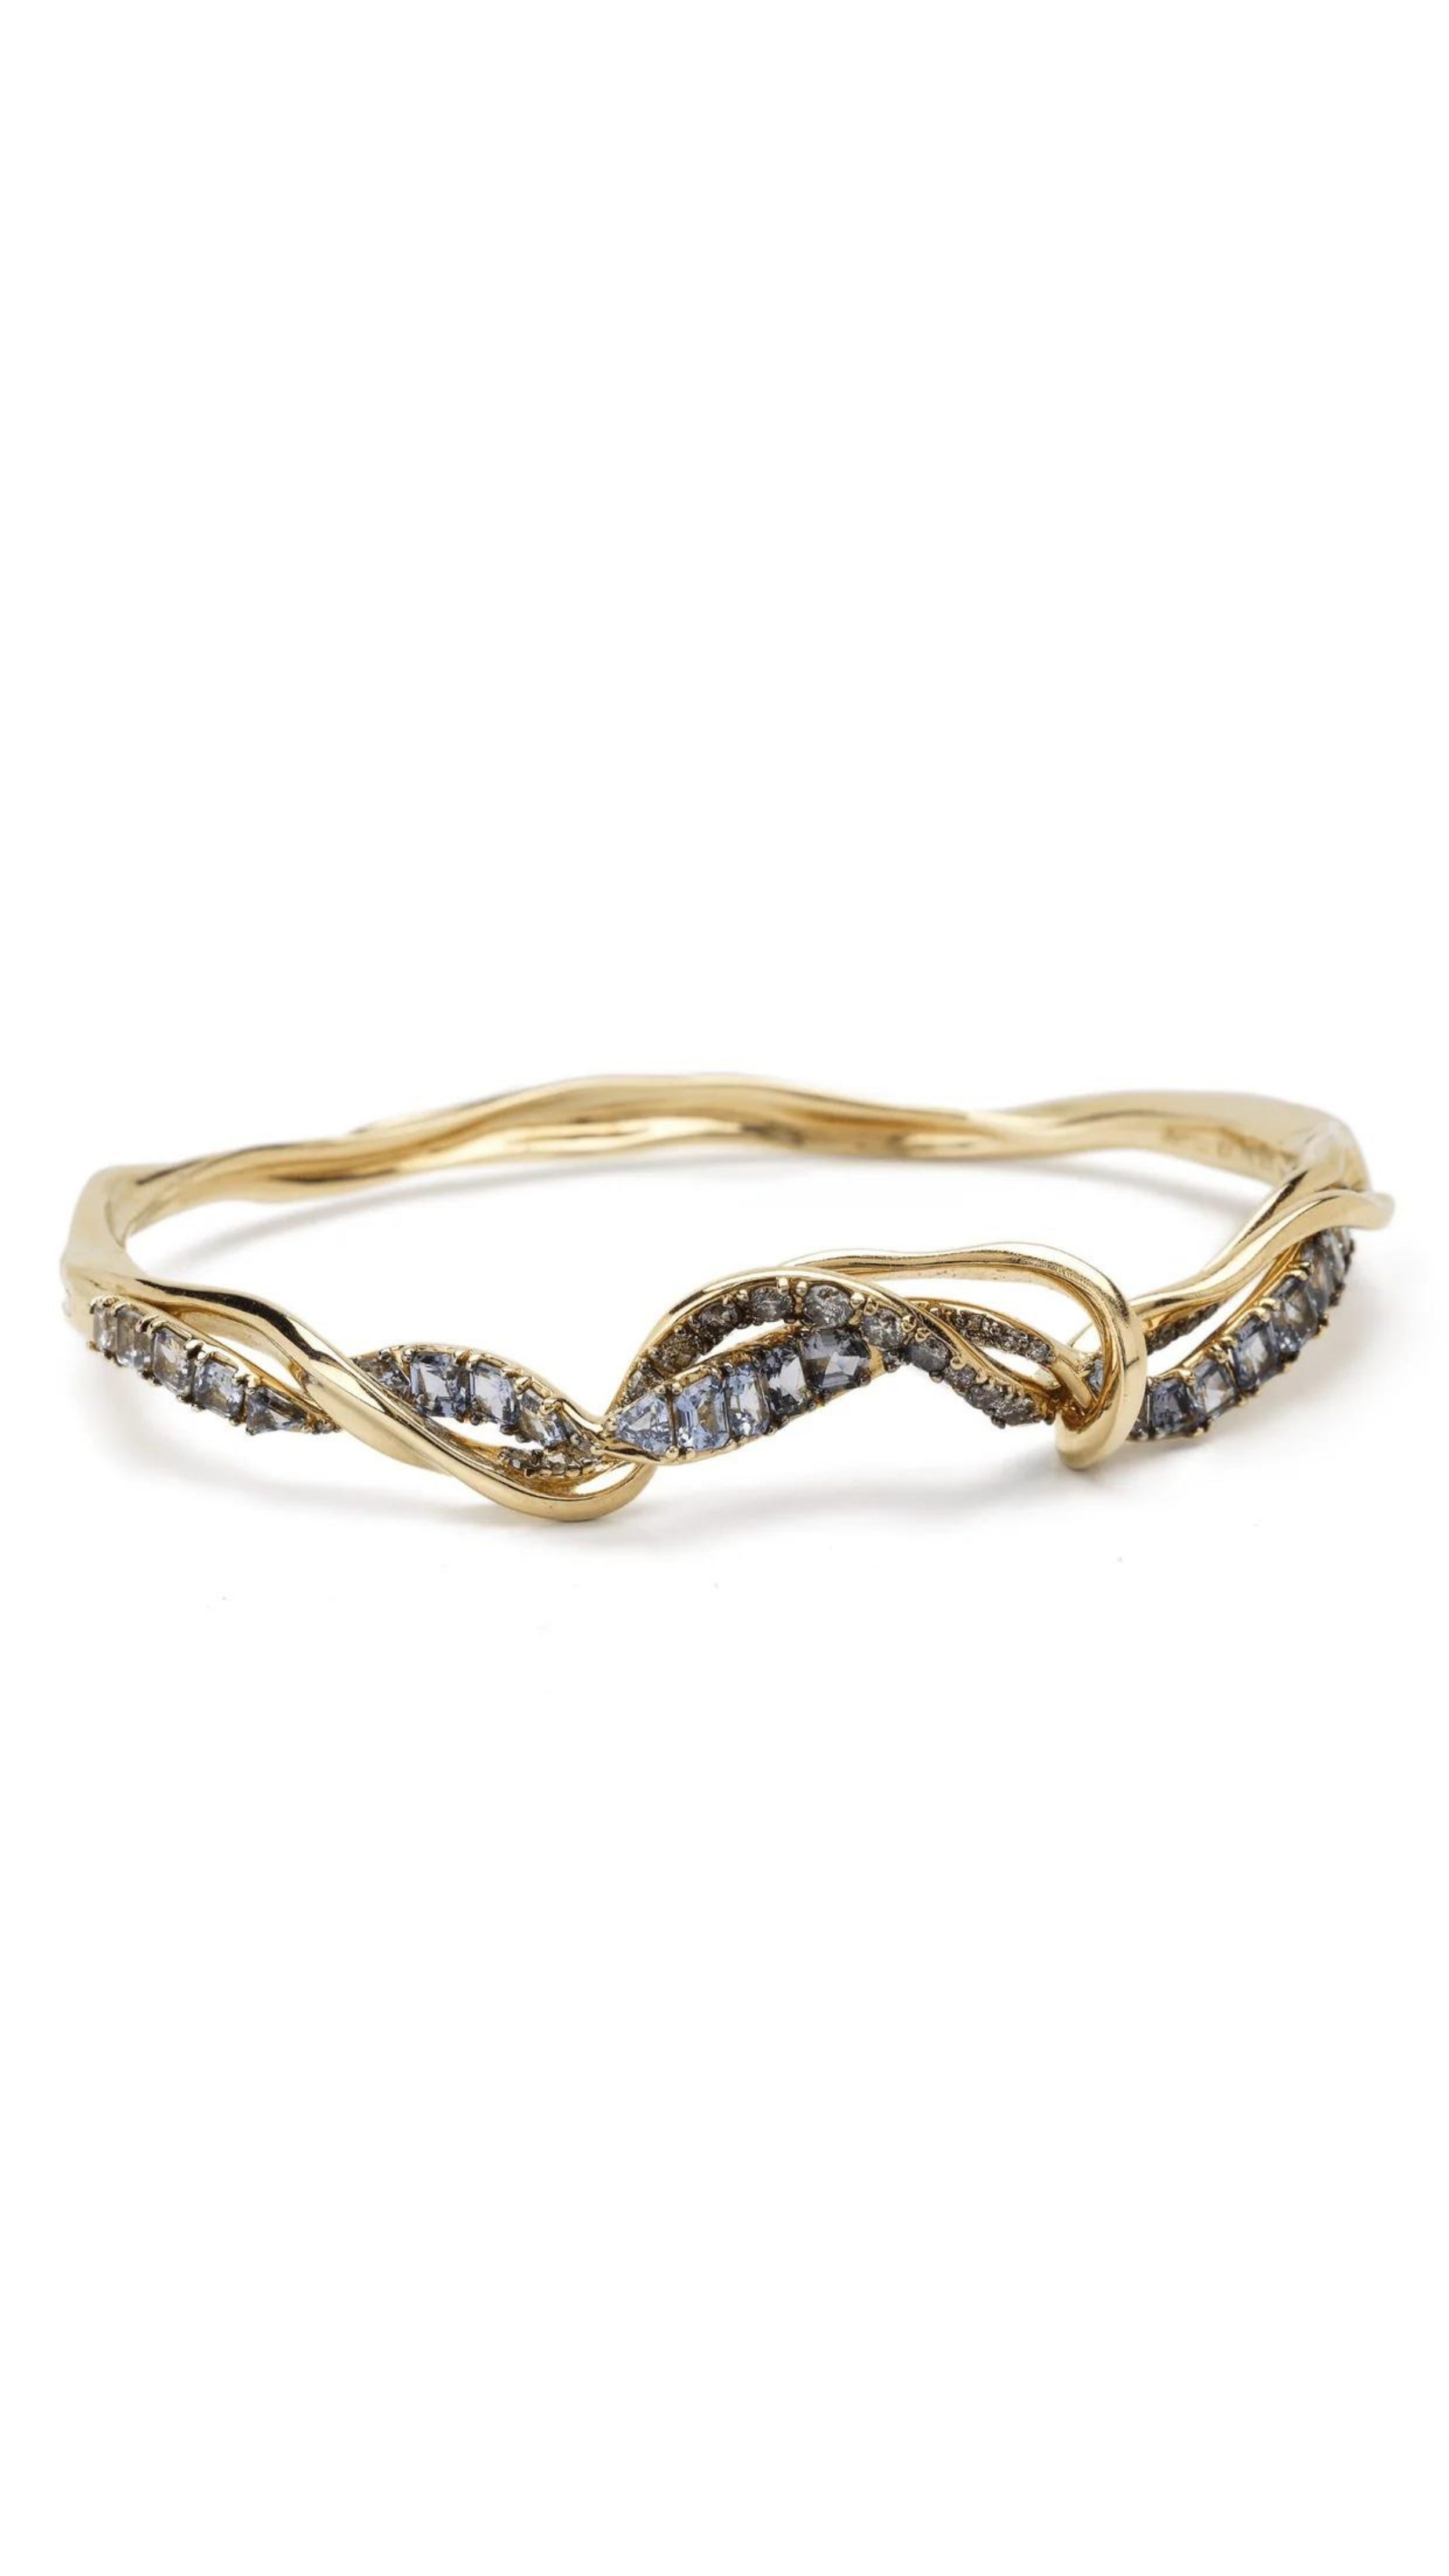 Bibi van der Velden Diamond Vapour Bangle - Bangle style bracelet created in interwoven 18K gold and set with white and grey diamonds. Product photo shown from the front.